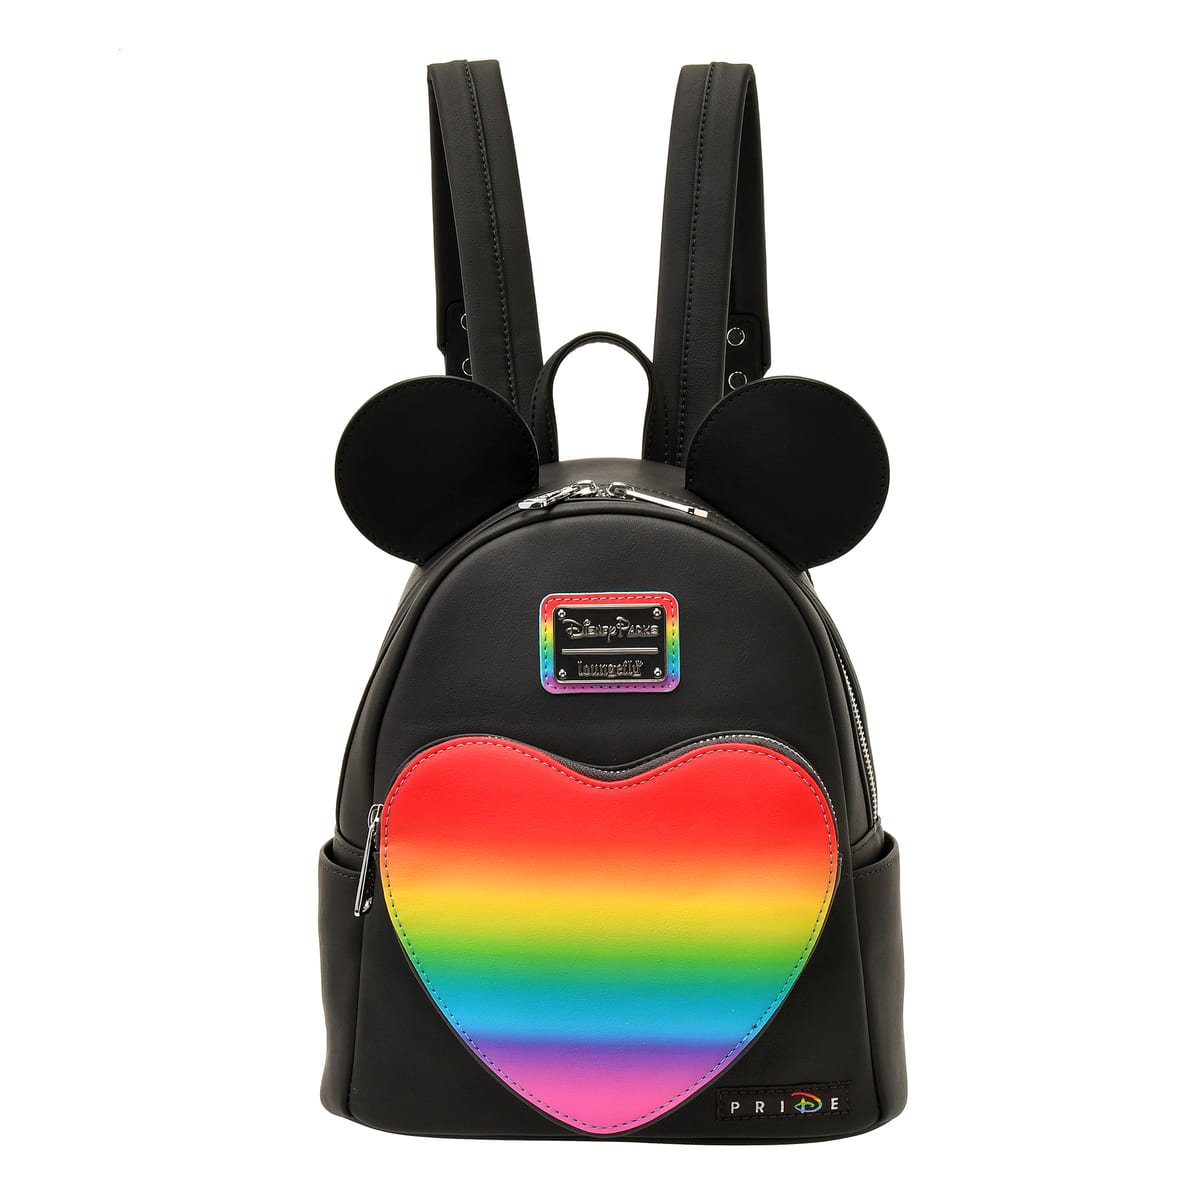 【Loungefly】ミッキー リストレット THE WALT DISNEY COMPANY PRIDE COLLECTION